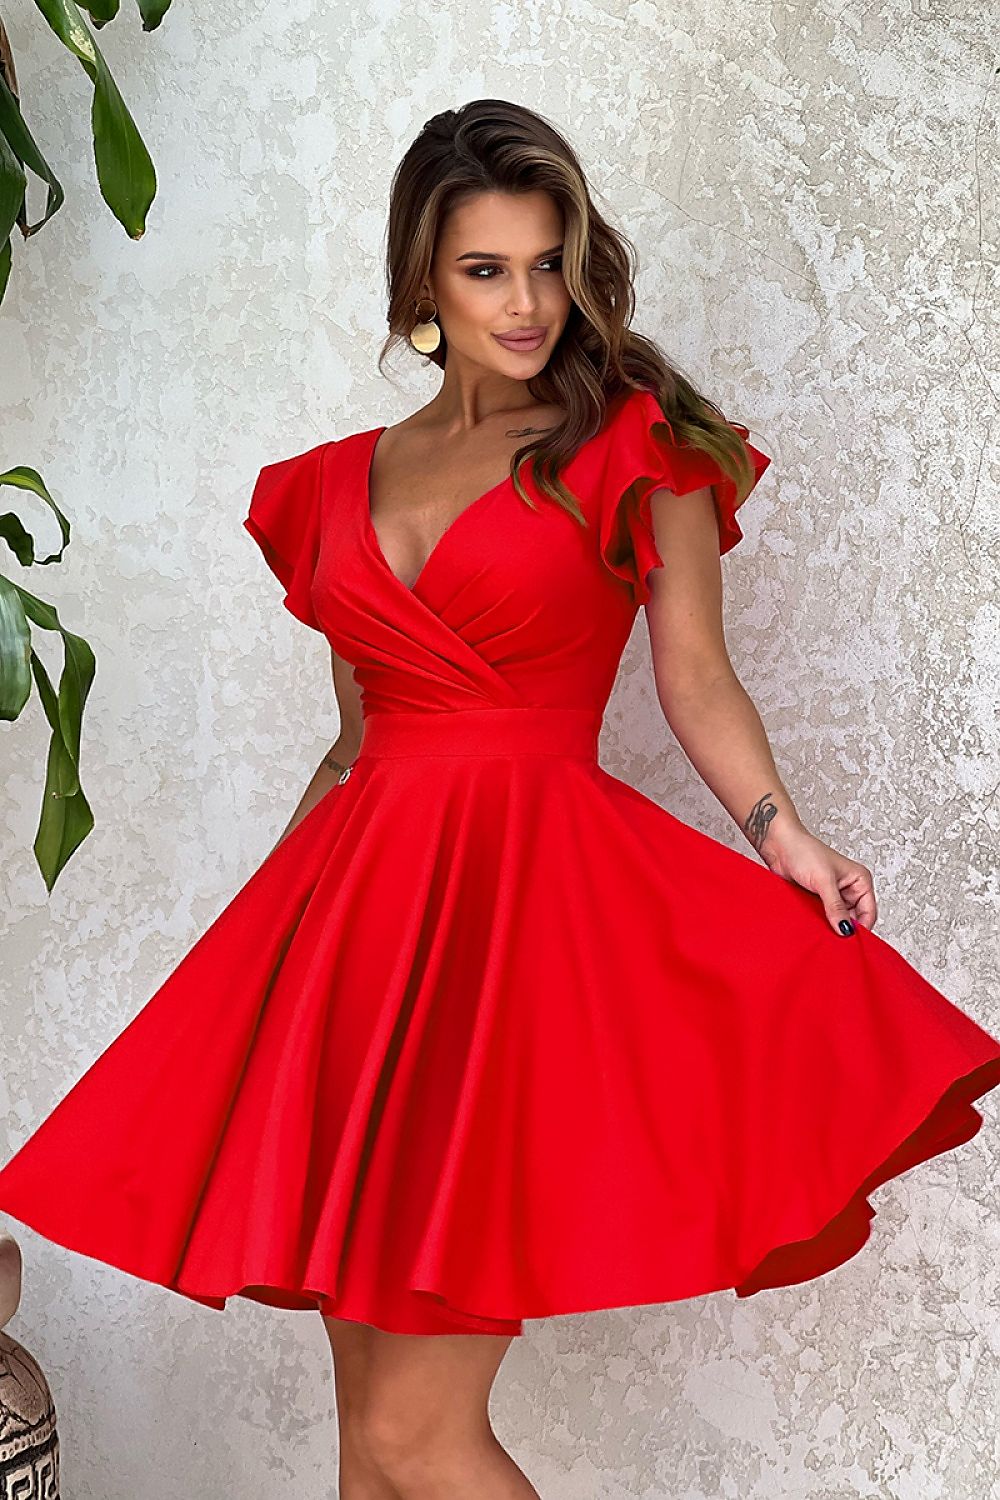 Cocktail dress model 188228 Red by Bicotone - Short Dresses